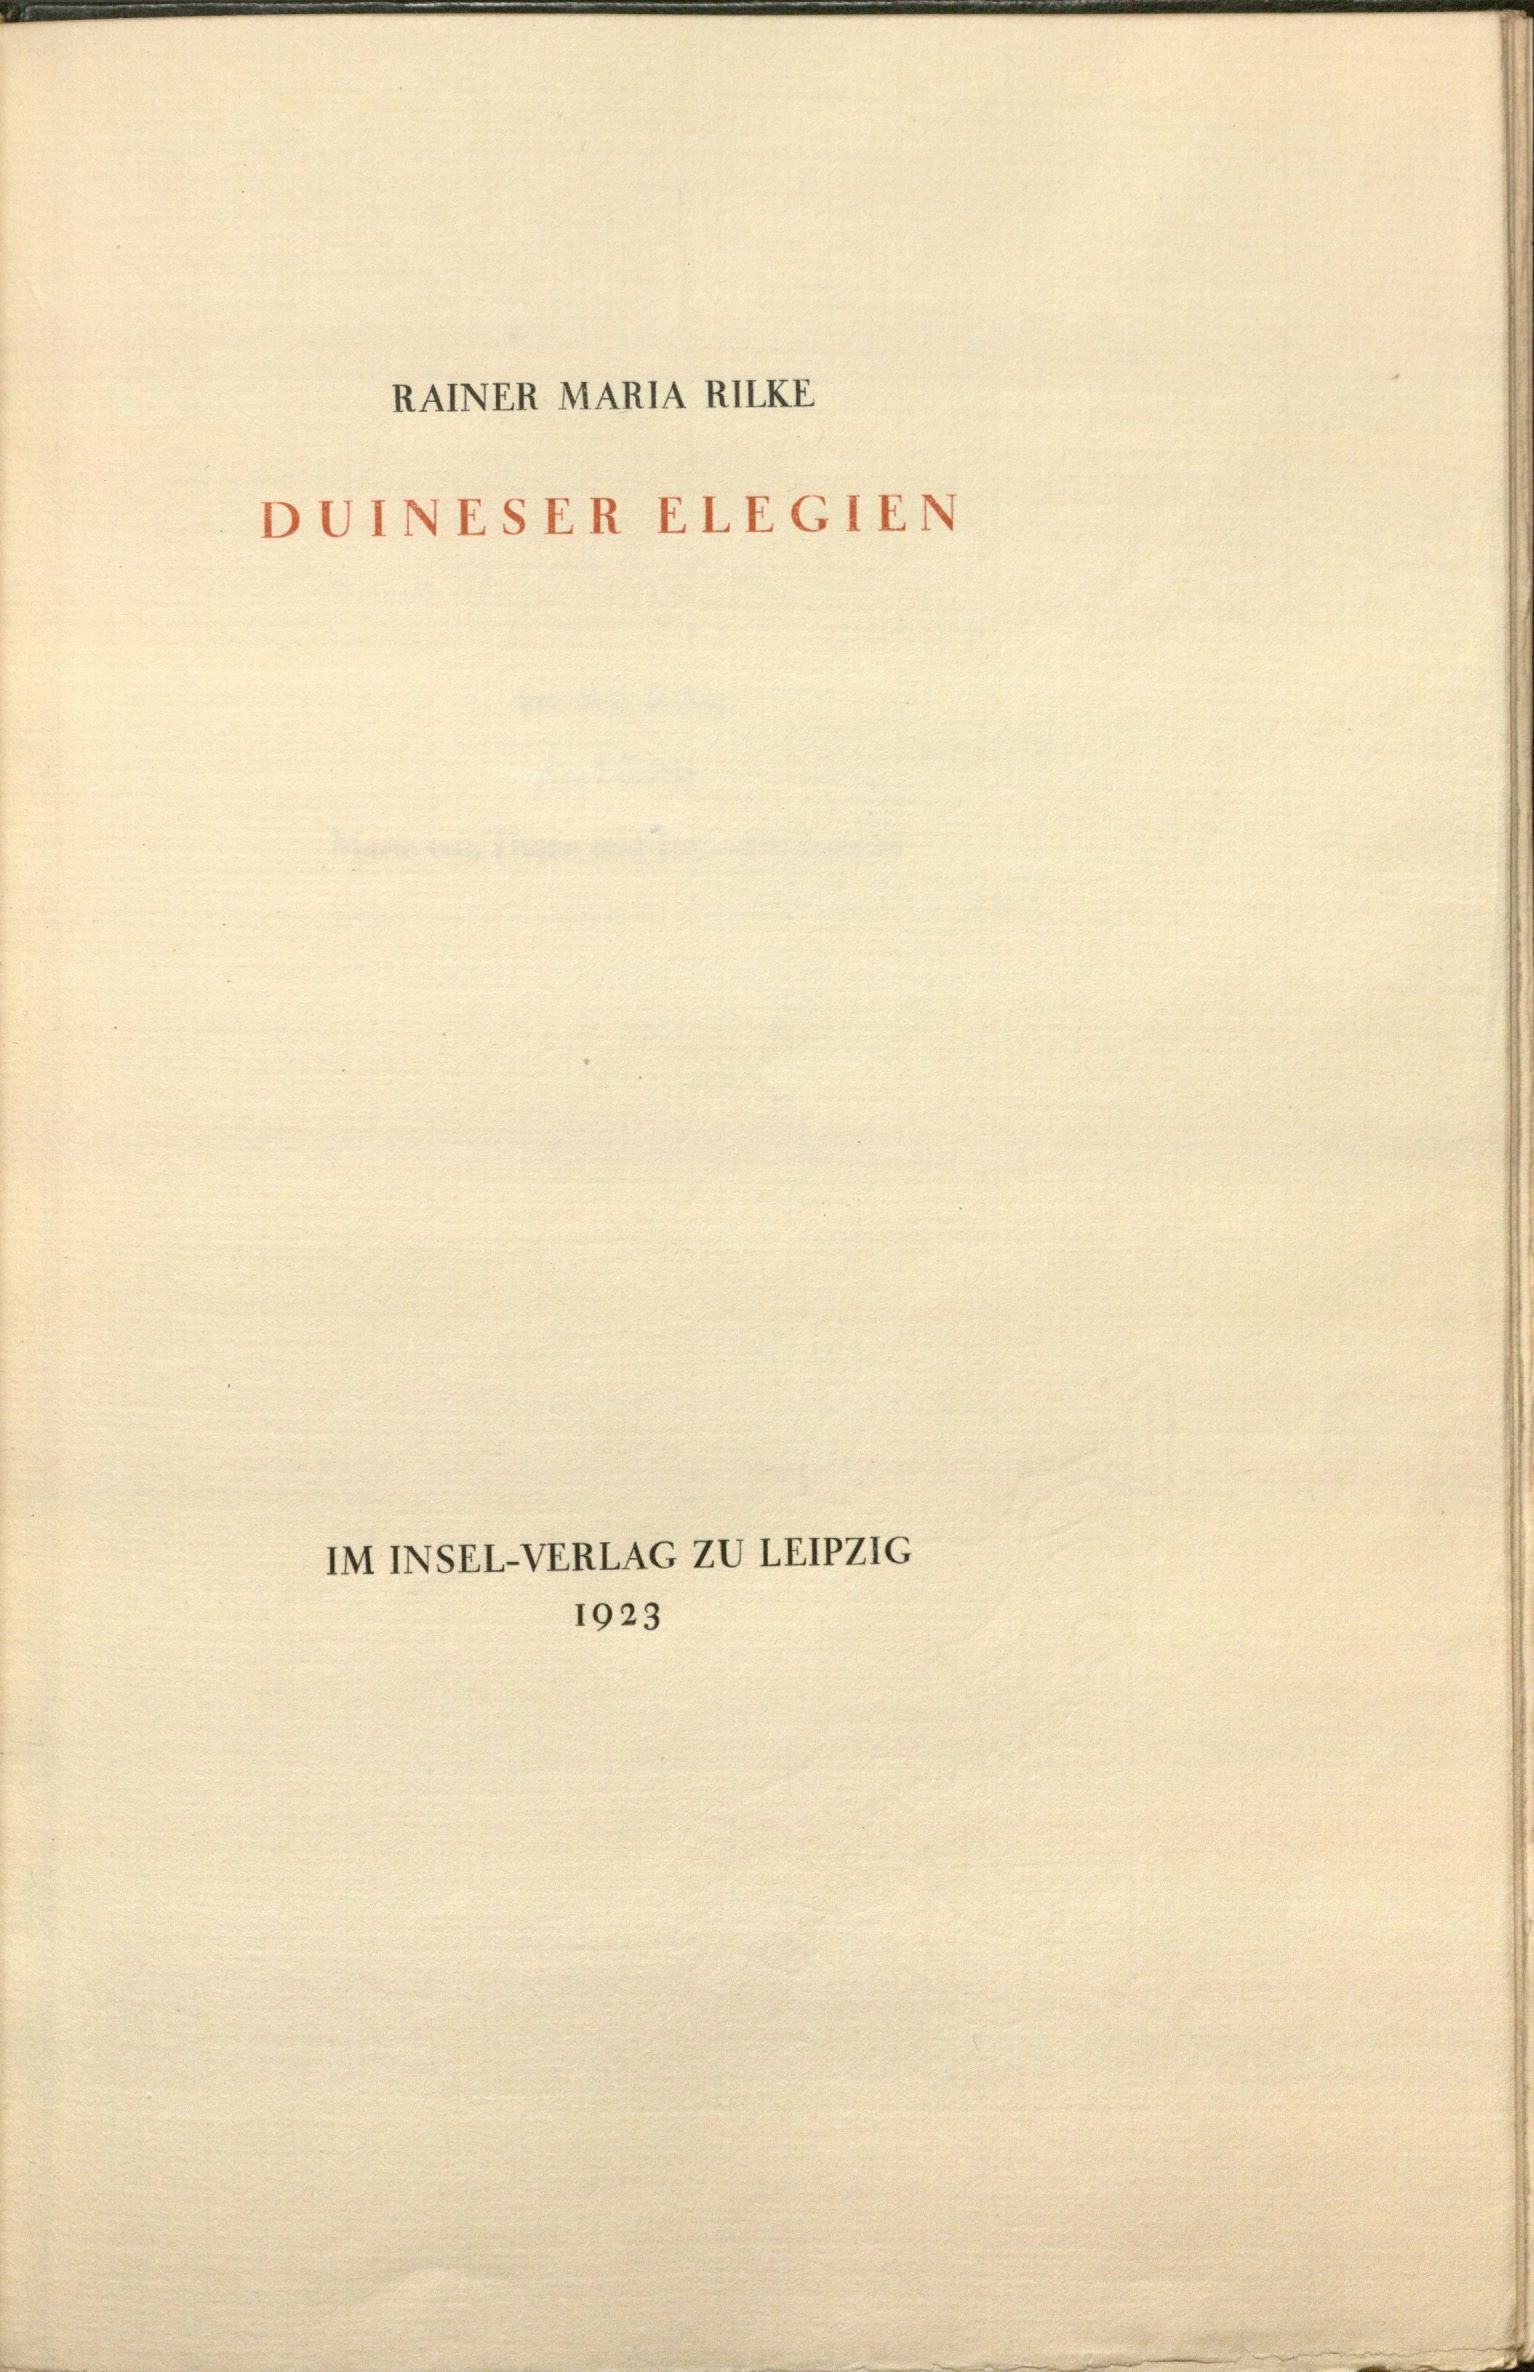 Rainer Maria Rilke’s Duineser Elegien, Leipzig: im Insel-Verlag, 1923: title page with unicorn watermark. Special Collections, call number: Rilke Z50.